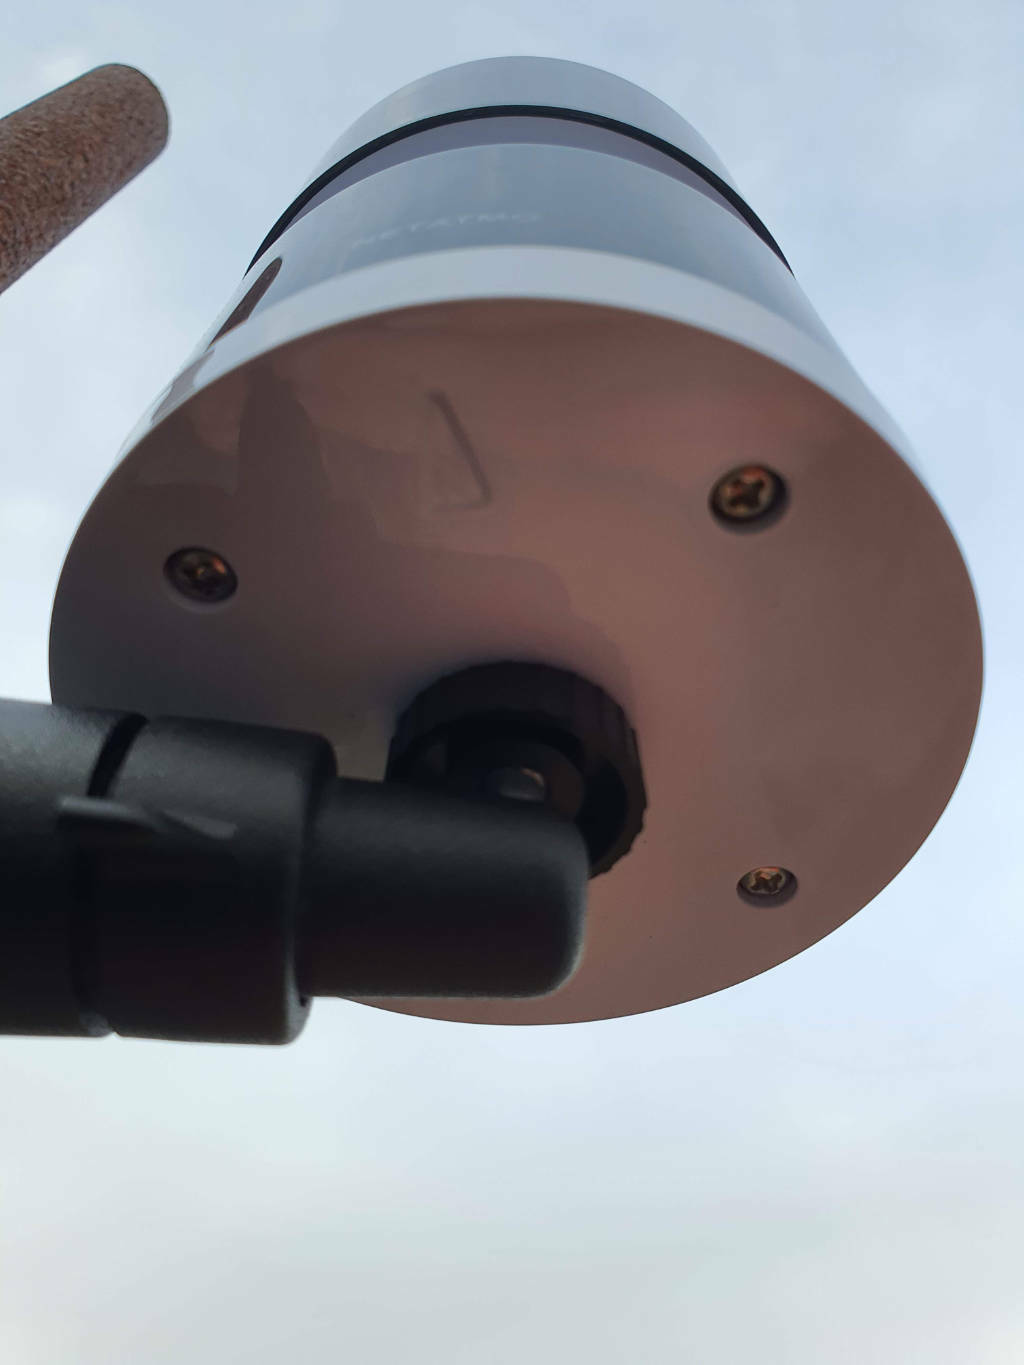 Photo of the arrow on the Netatmo Anemometer that needs to be pointed north for accurate readings